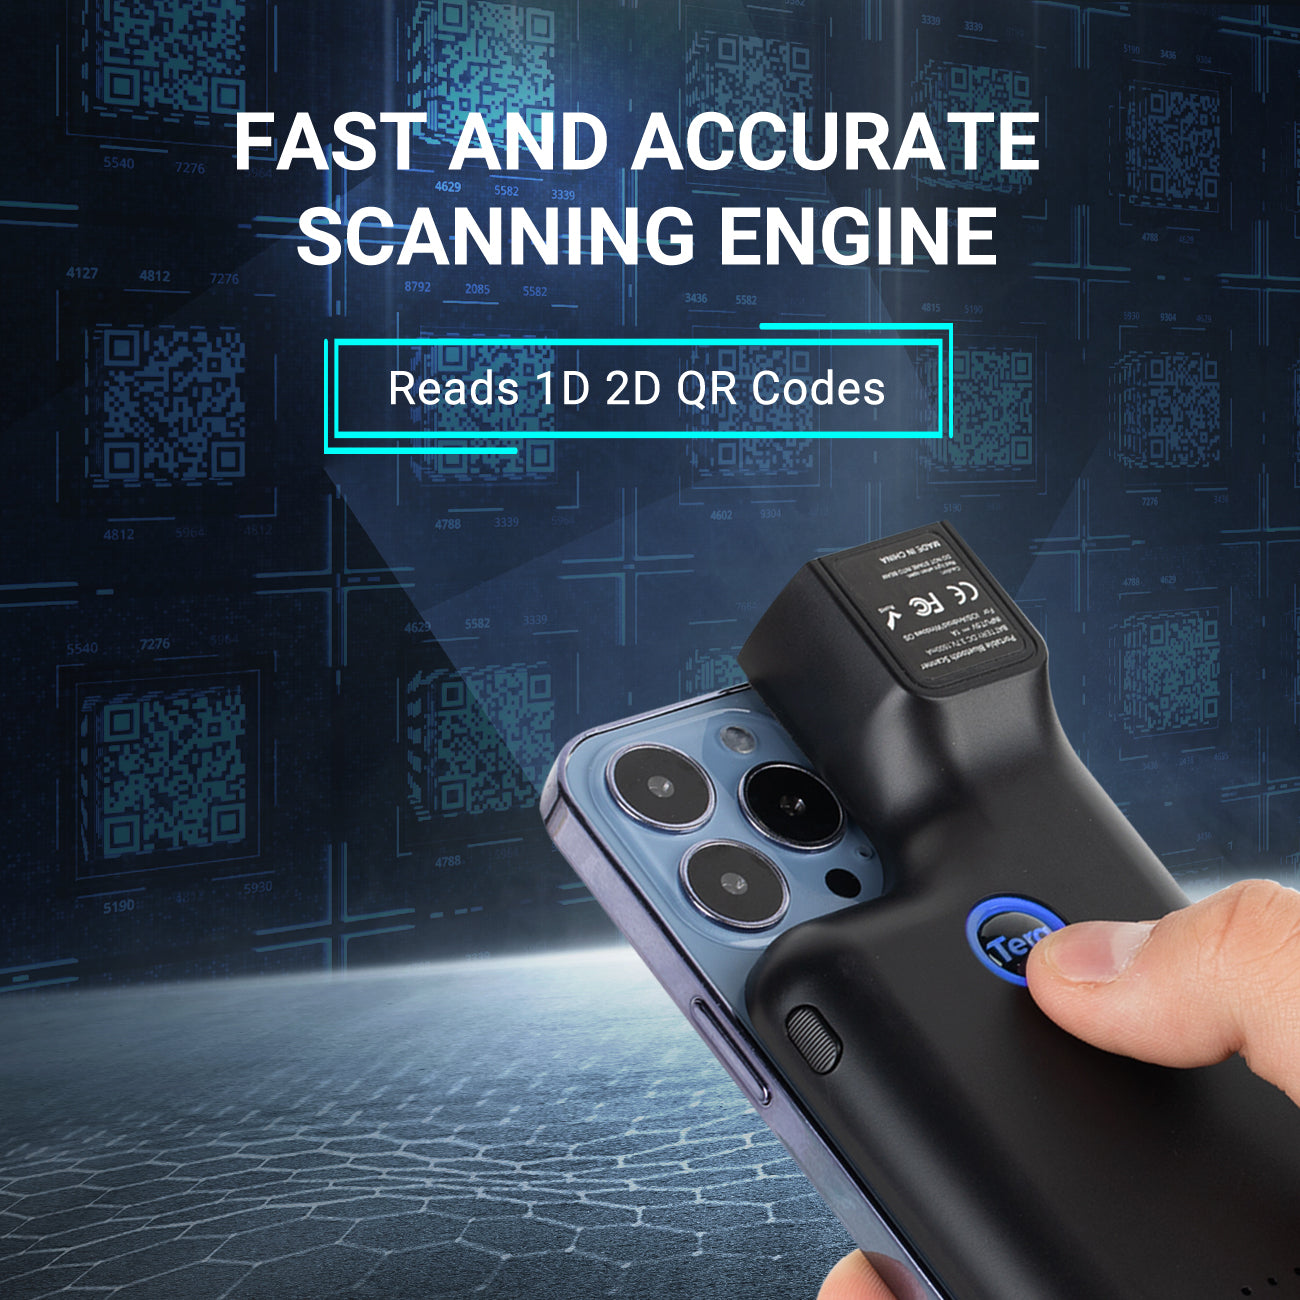 0013-2d-backclip-barcode-scanner-for-smartphone-bluetooth-wireless-type-c-connection-decodes-1d-2d-qr-codes